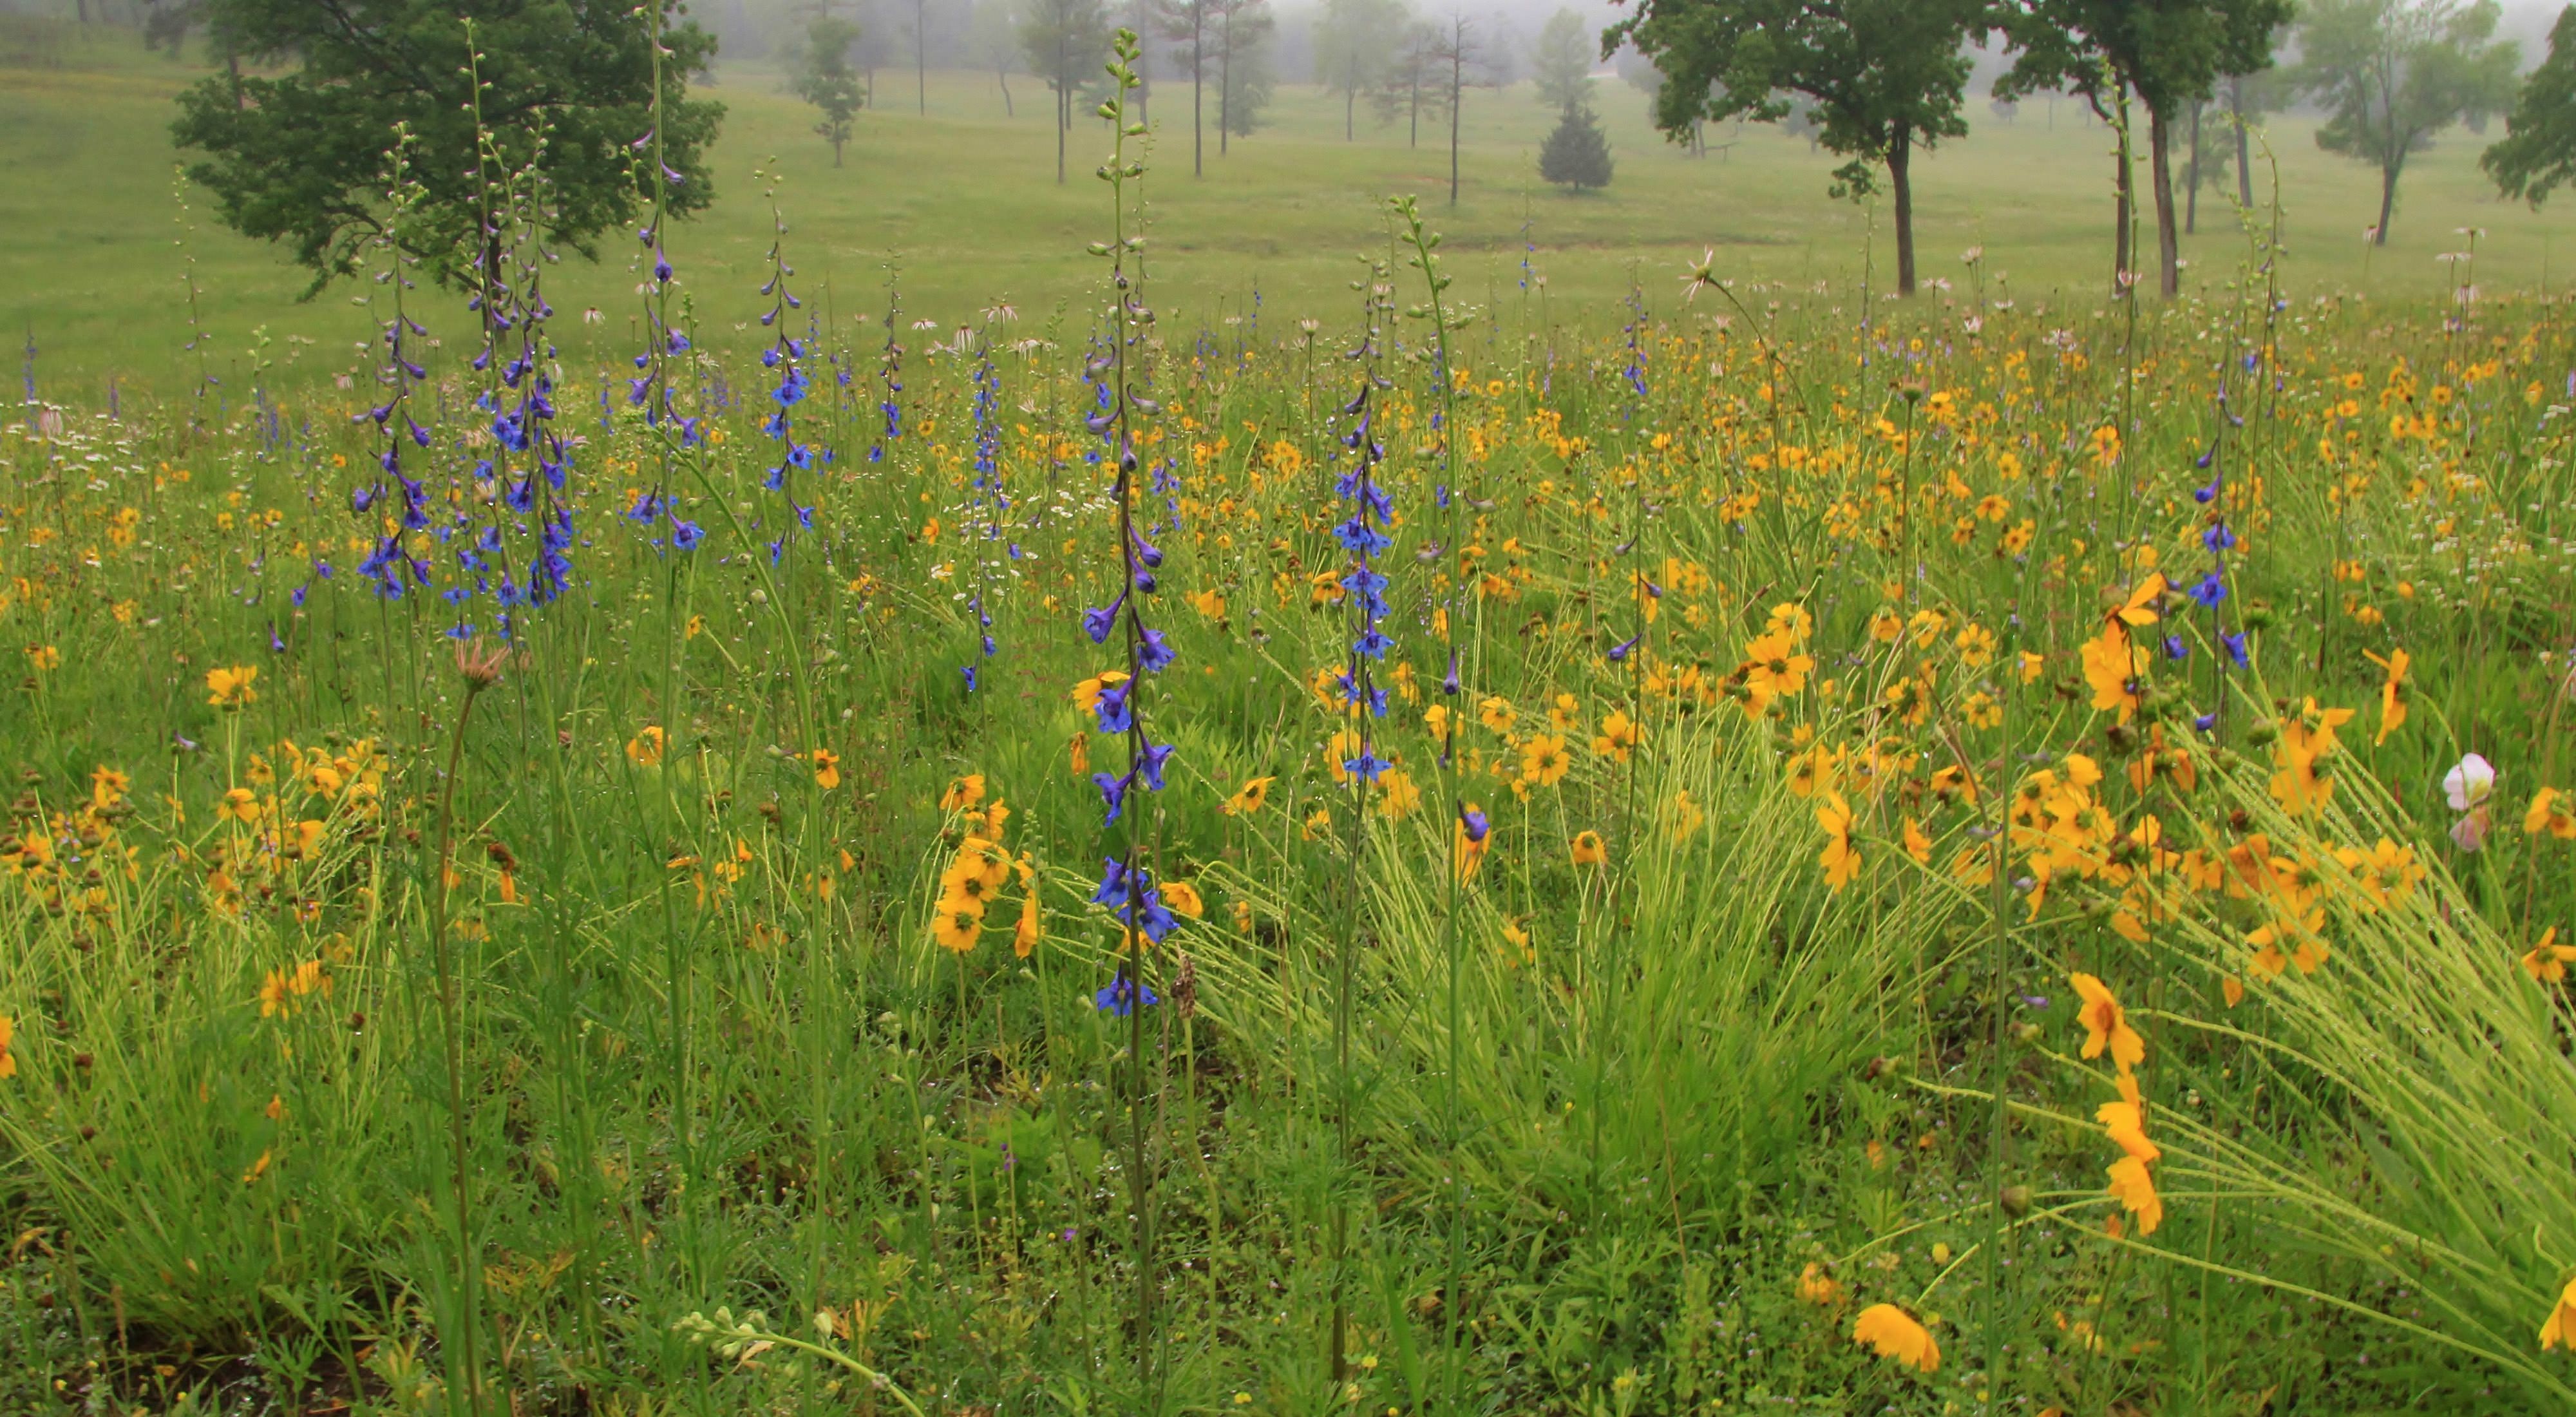 Carolina Larkspur and Pale Purple Coneflowers are on display every year at Terre Noire along with 400 other species of plants and wildflowers.